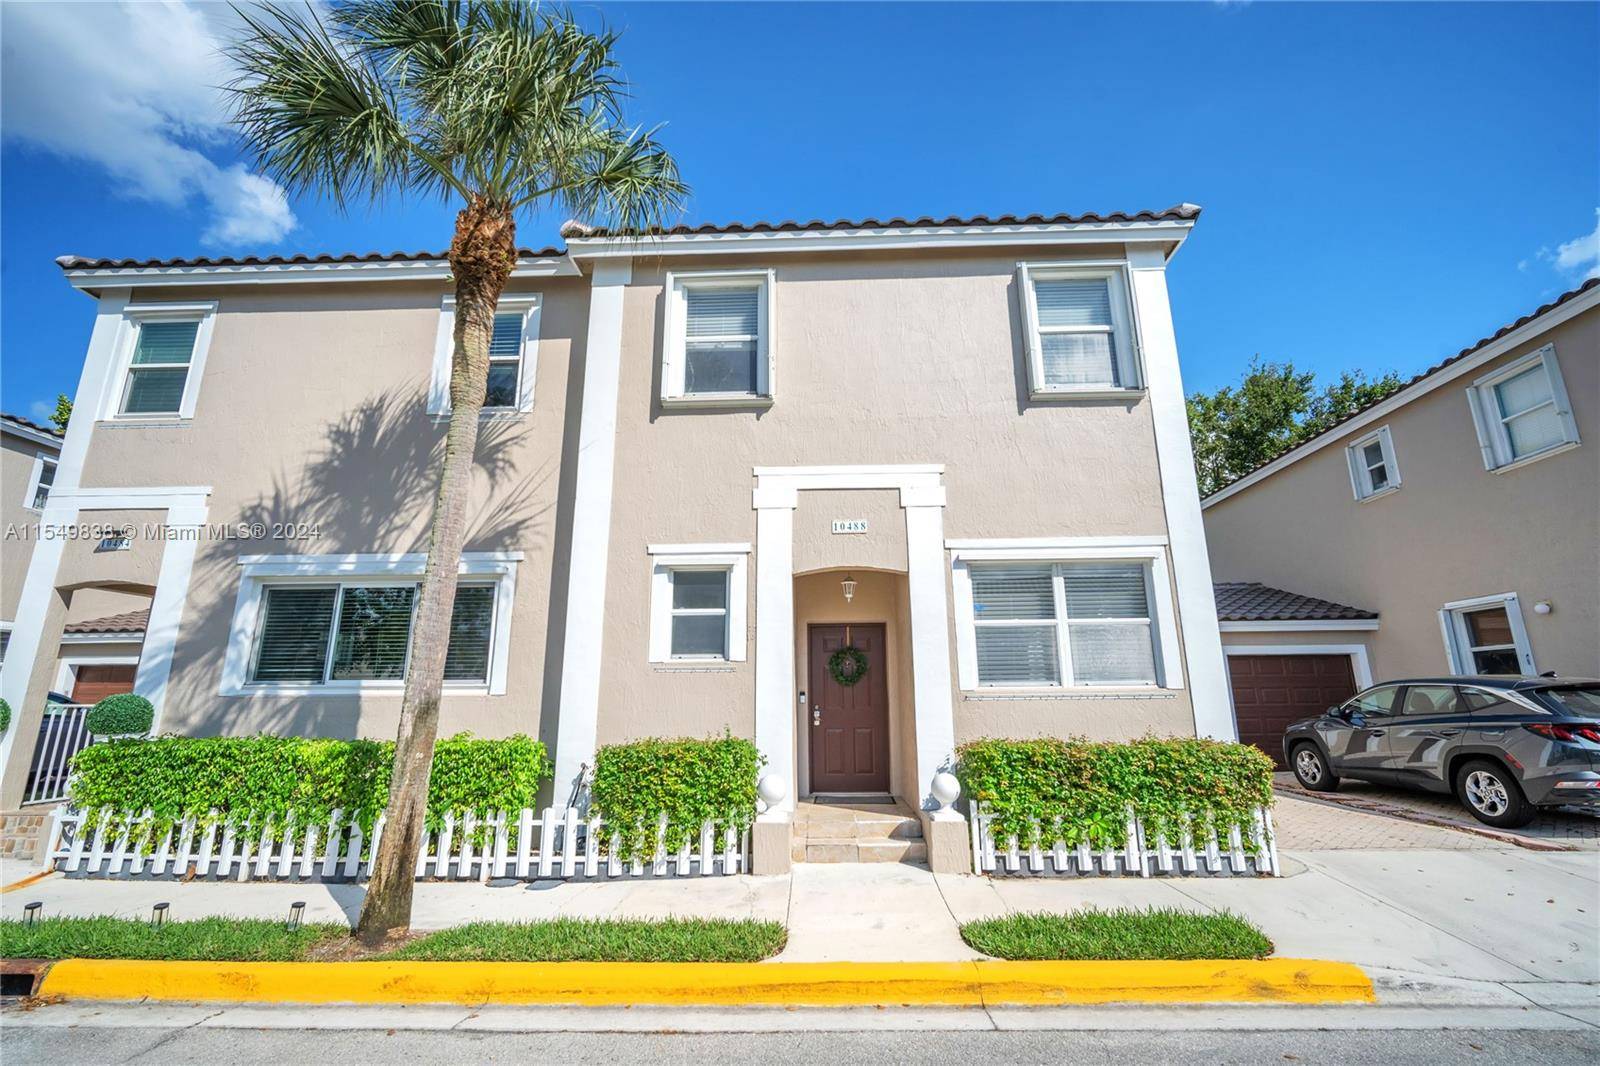 TOTAL REMODELED TOWNHOME CENTRALLY LOCATED IN CORAL SPRINGS NEAR THE SAWGRASS EXPRESSWAY.